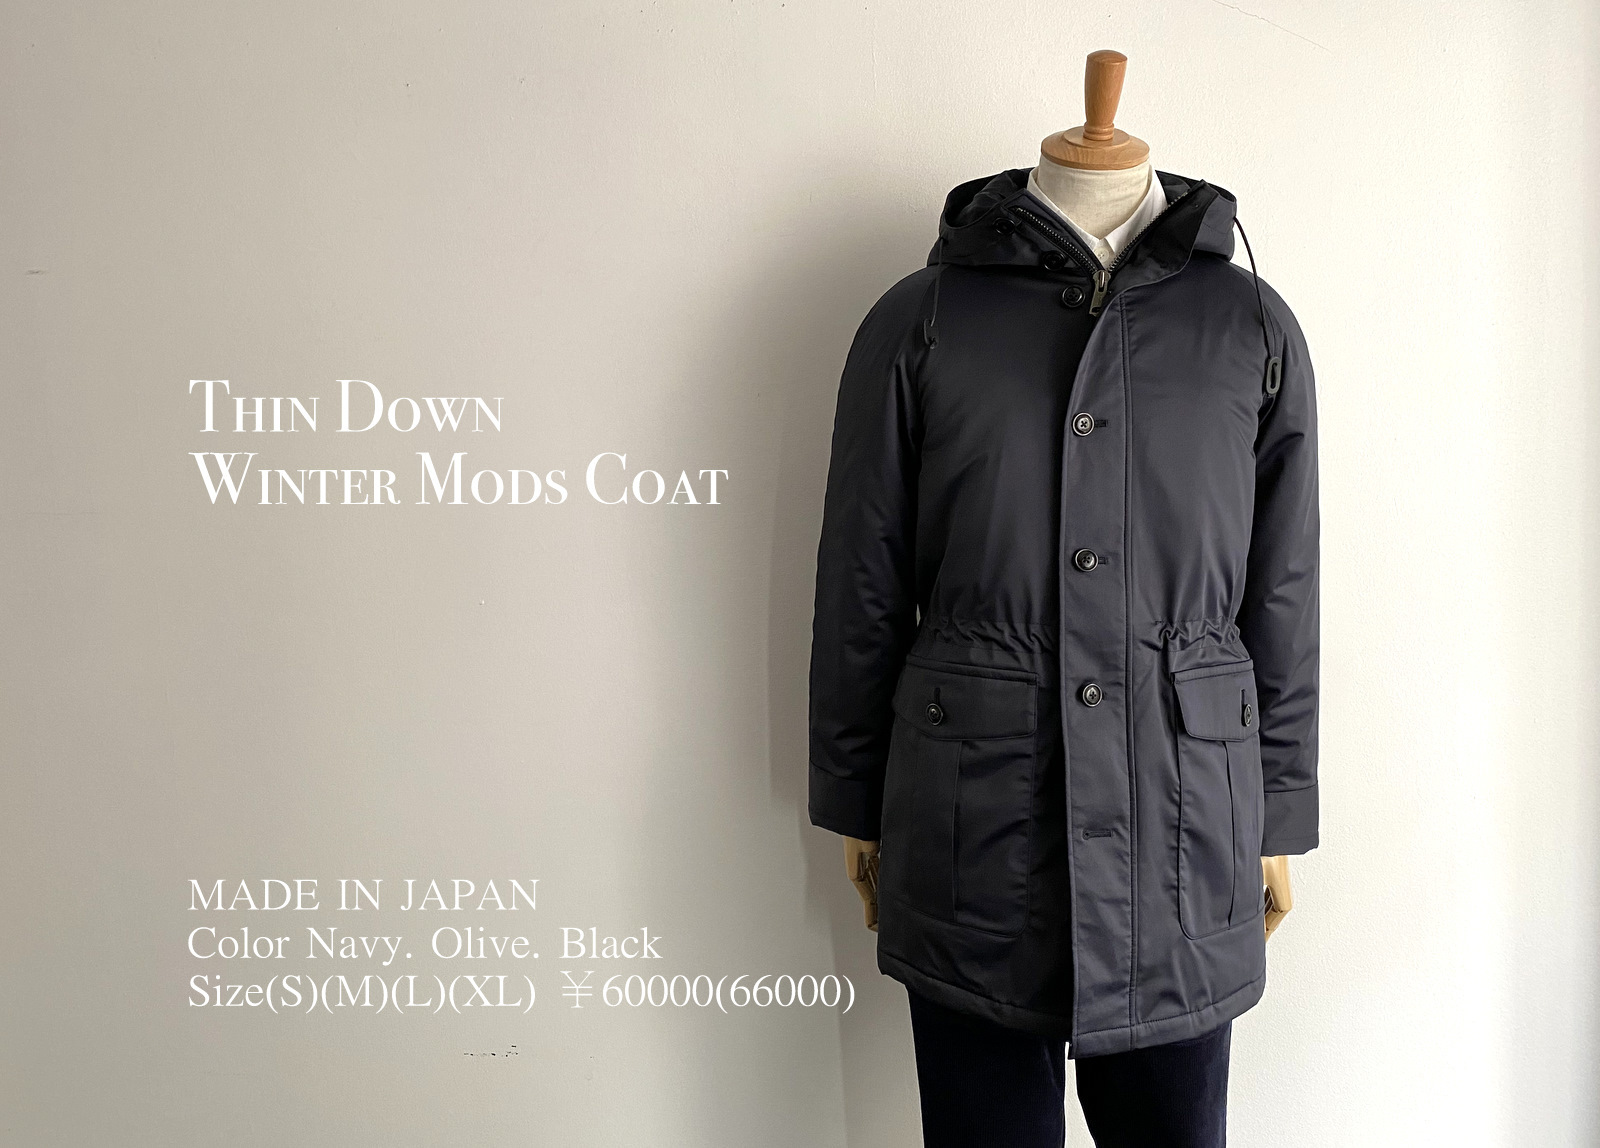 Thin Down Winter Mods Coat : 【Re made in tokyo japan】NEW ITEM INFO